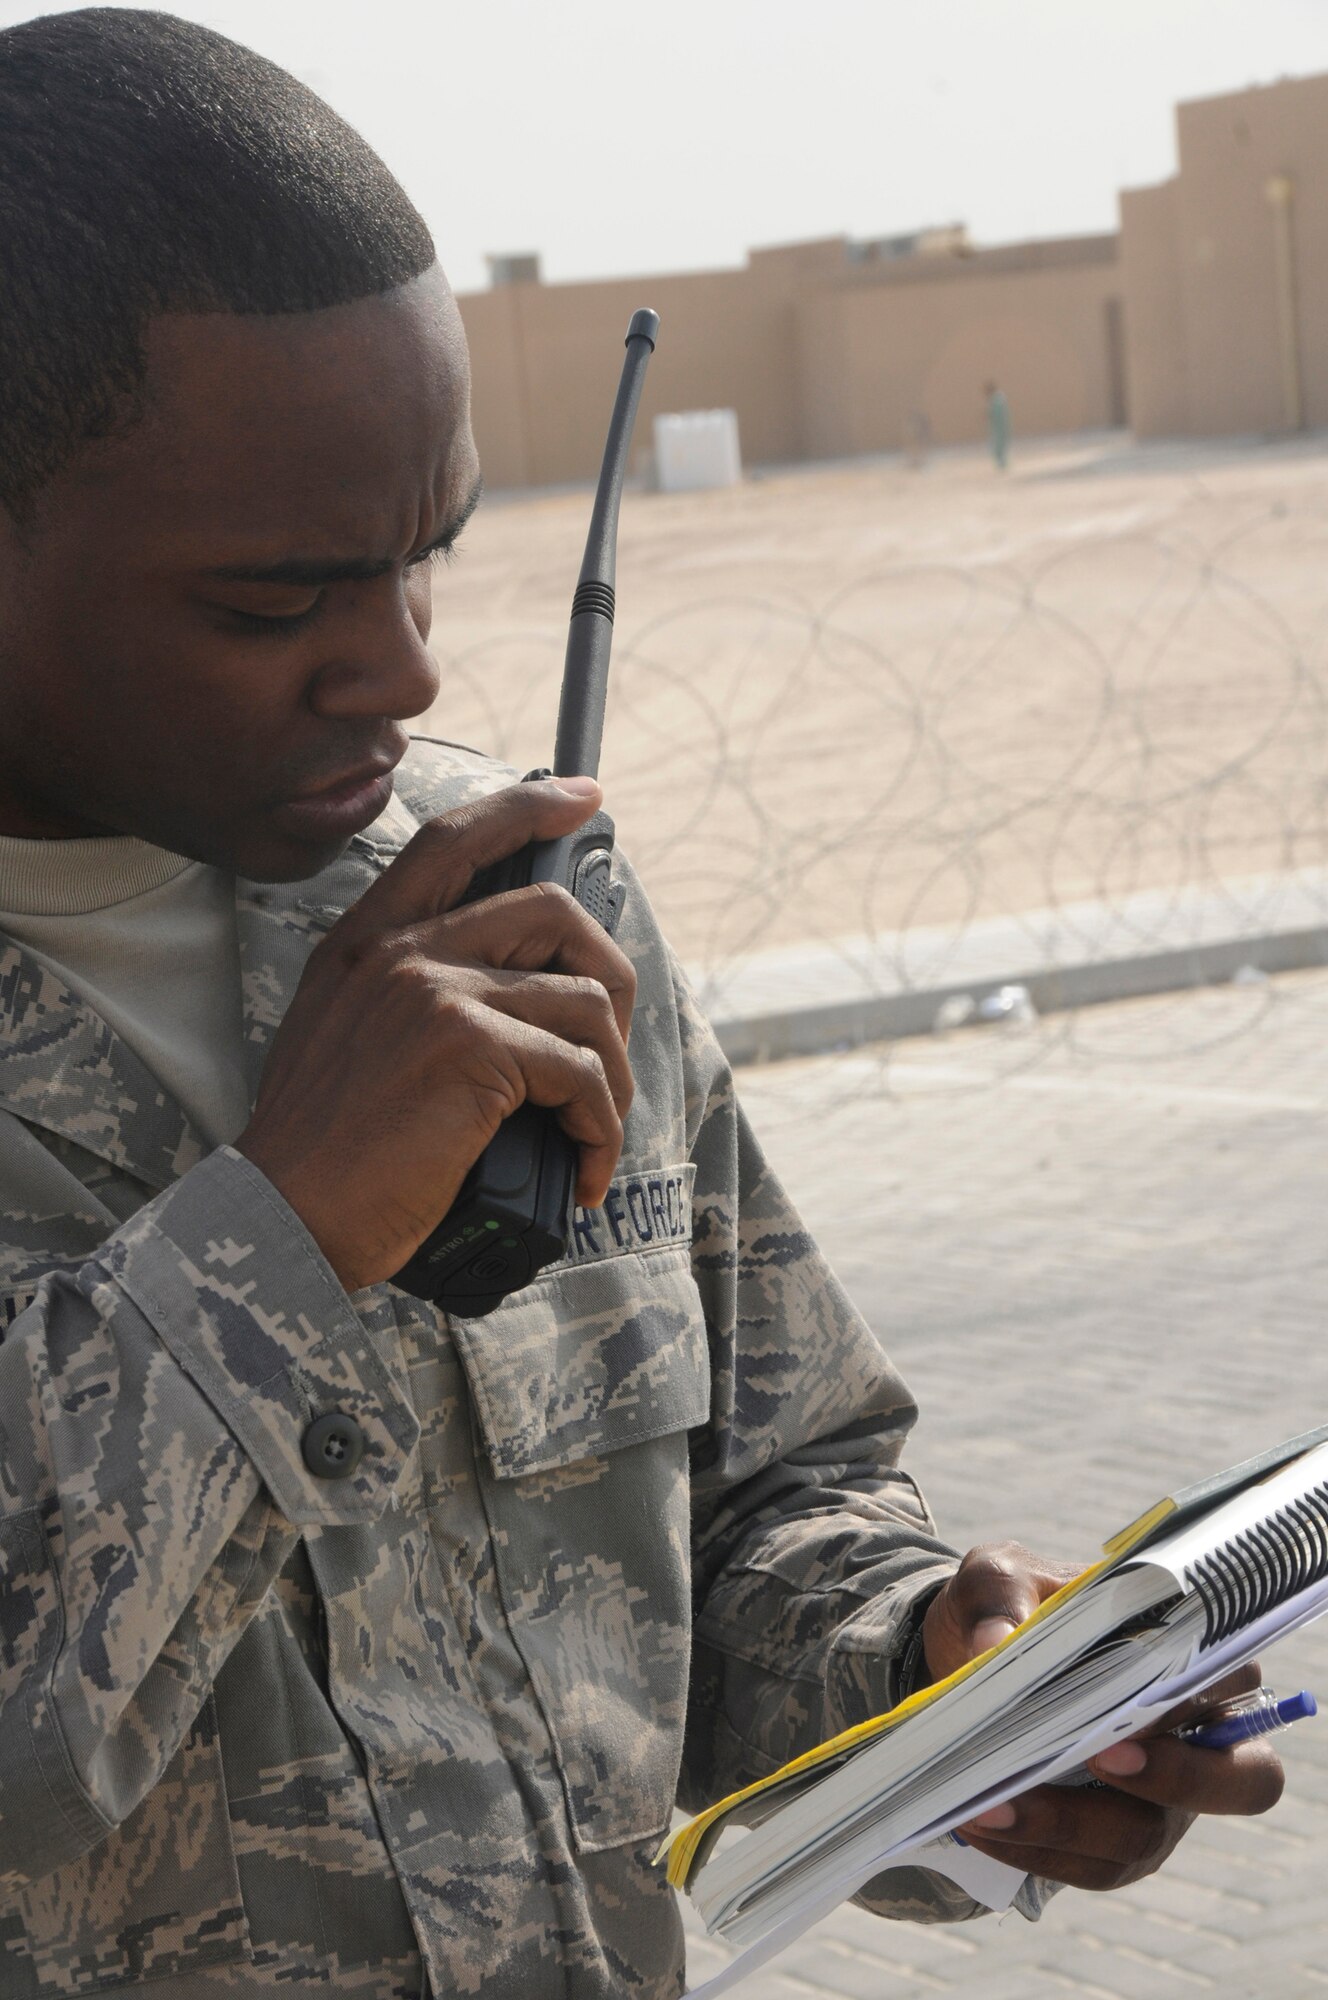 Staff Sgt. Jacques English, optometry technician assigned to the 379th Expeditionary Medical Group, uses his radio and Airman's Manual to report information about unexploded ordinance discovered while conducting a post-attack reconnaissance sweep during a base-wide defense response exercise Oct. 22, at an undisclosed air base in Southwest Asia. PAR teams are responsible for ensuring the perimeter of their facility is safe and assisting any injured personnel found outside. Sergeant English, a native of Fayetteville, N.C., is deployed from the Air Force Academy, Colo., in support of Operations Iraqi and Enduring Freedom and Joint Task Force-Horn of Africa. (U.S. Air Force photo by Staff Sgt. Darnell T. Cannady/Released)